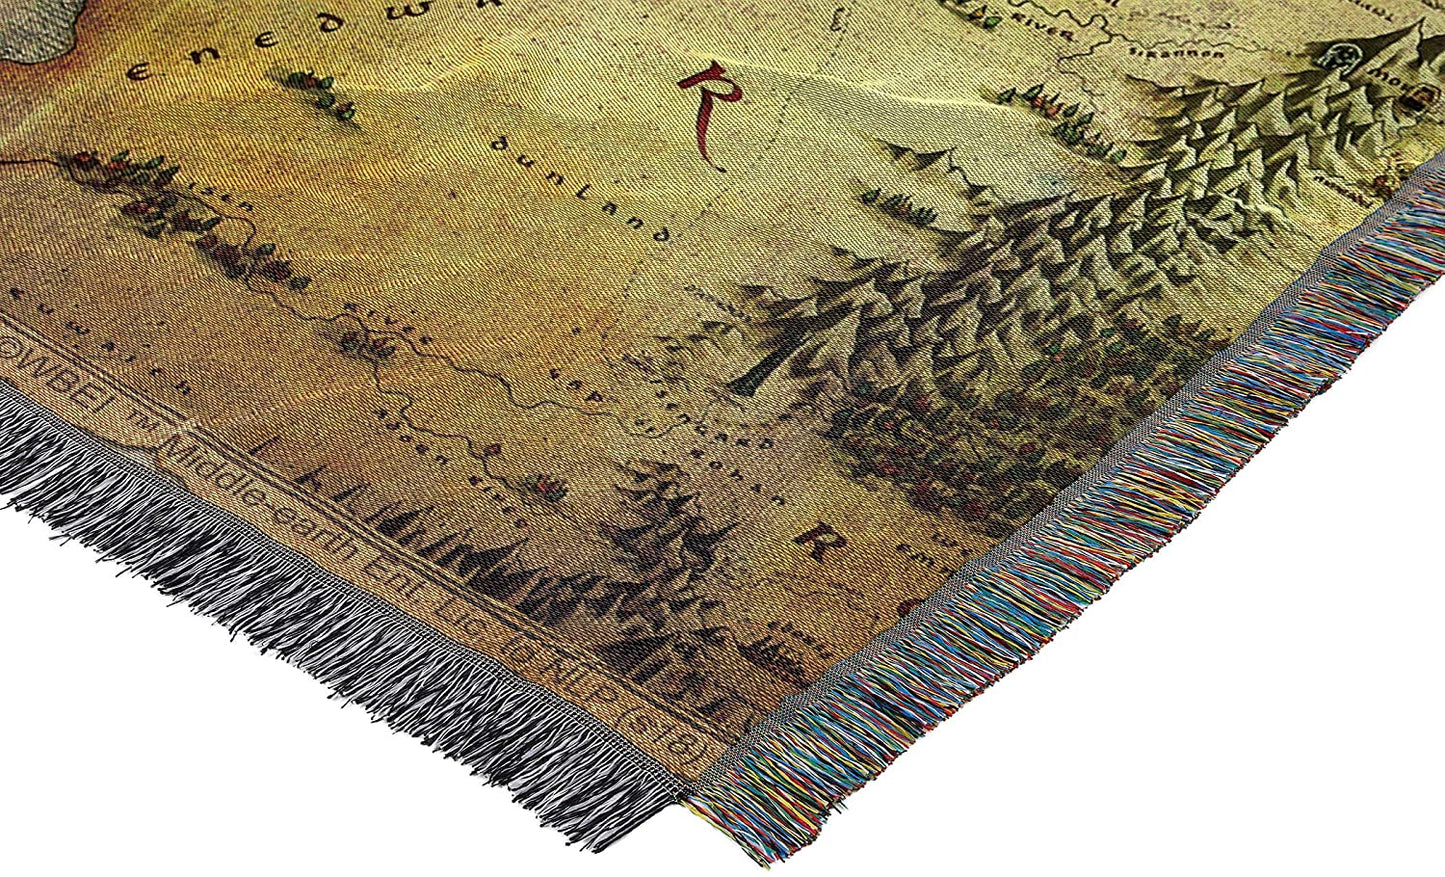 Middle Earth Lord of the Rings Woven Tapestry Throw Blanket